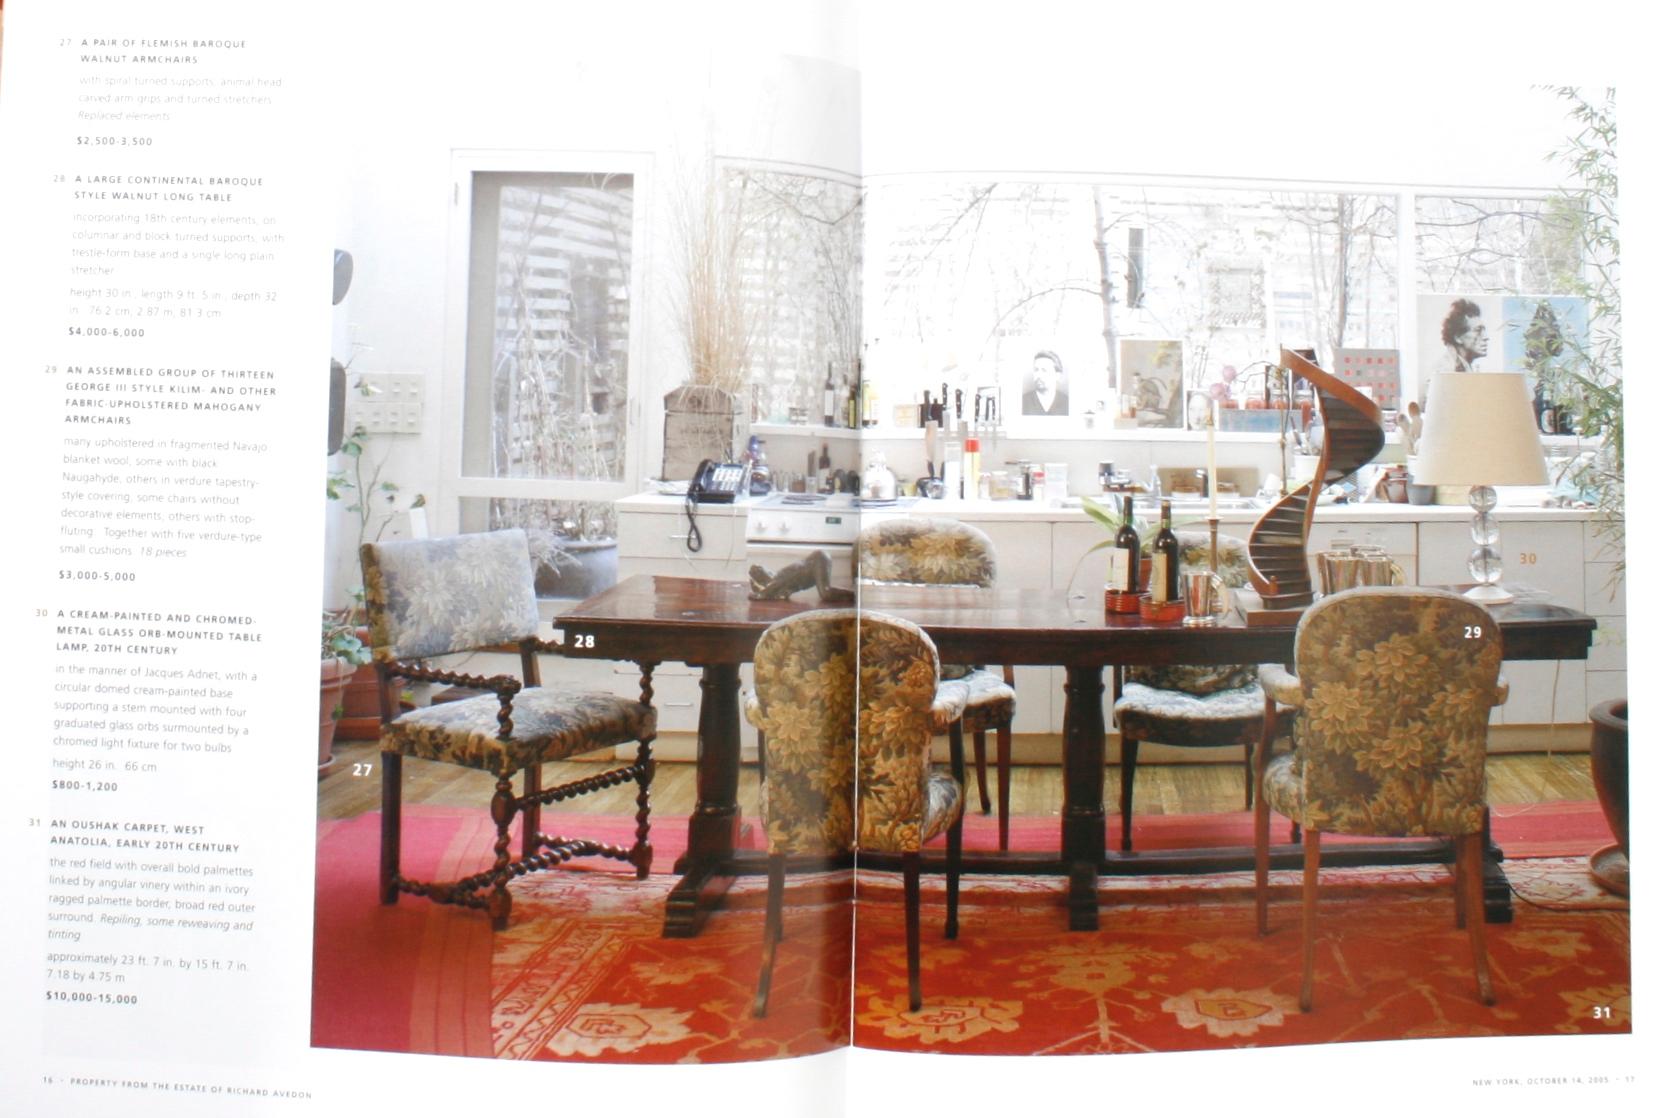 Contemporary Sotheby's: Property from the Estate of Richard Avedon, Sale #8091, October 2005